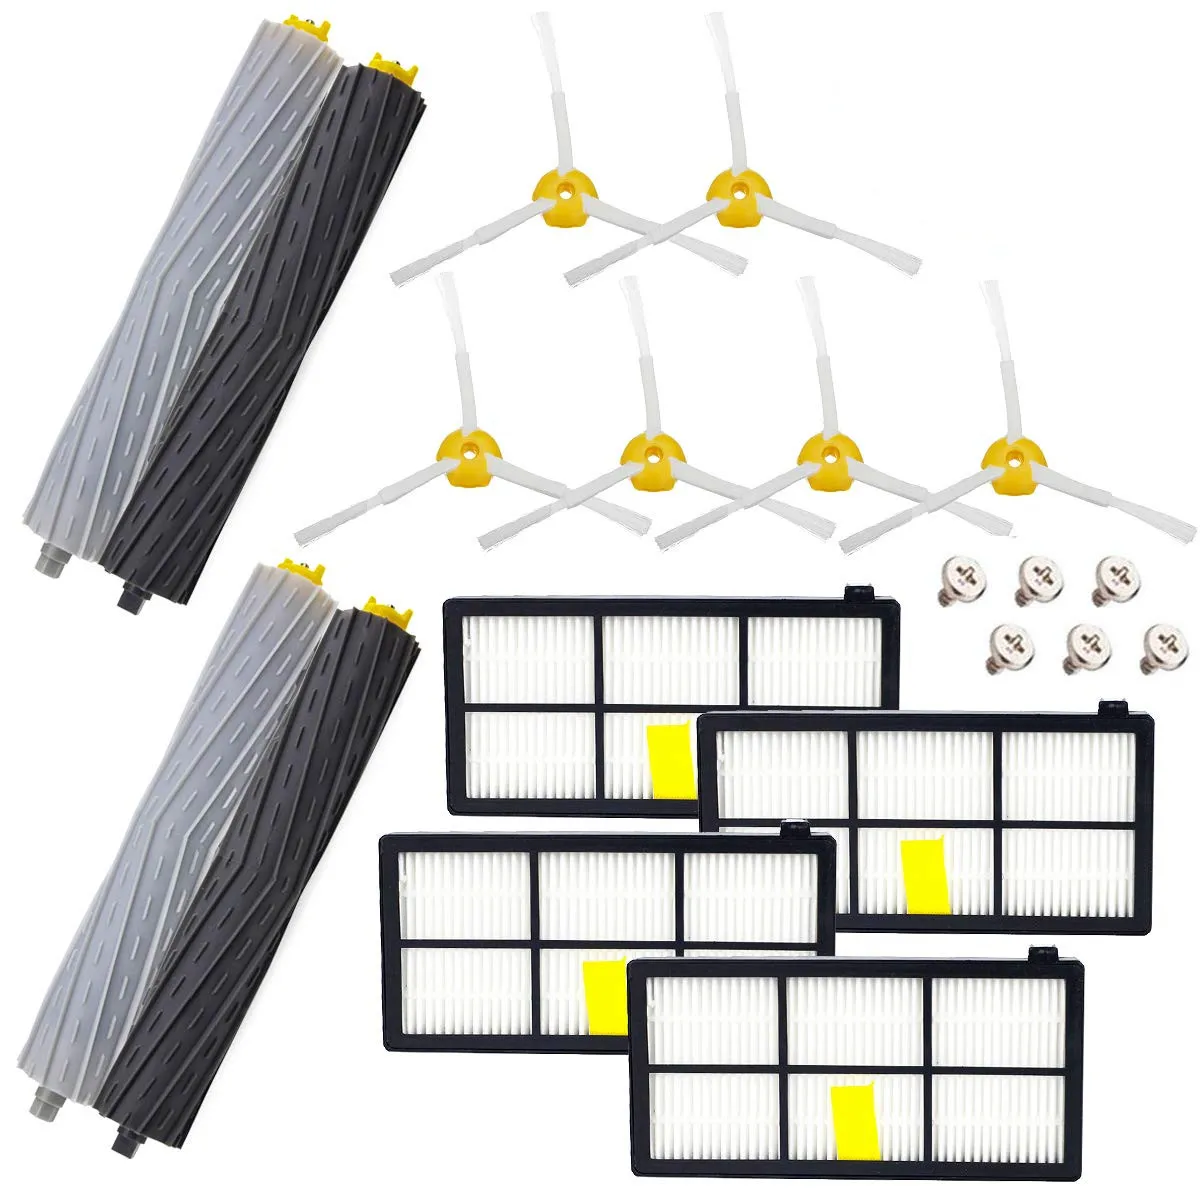 

14PCS HEPA Filters Brushes Kit for IRobot Roomba 800 900 Series 860 870 880 890 960 980 990 Robot Vacuum Cleaner Accessories